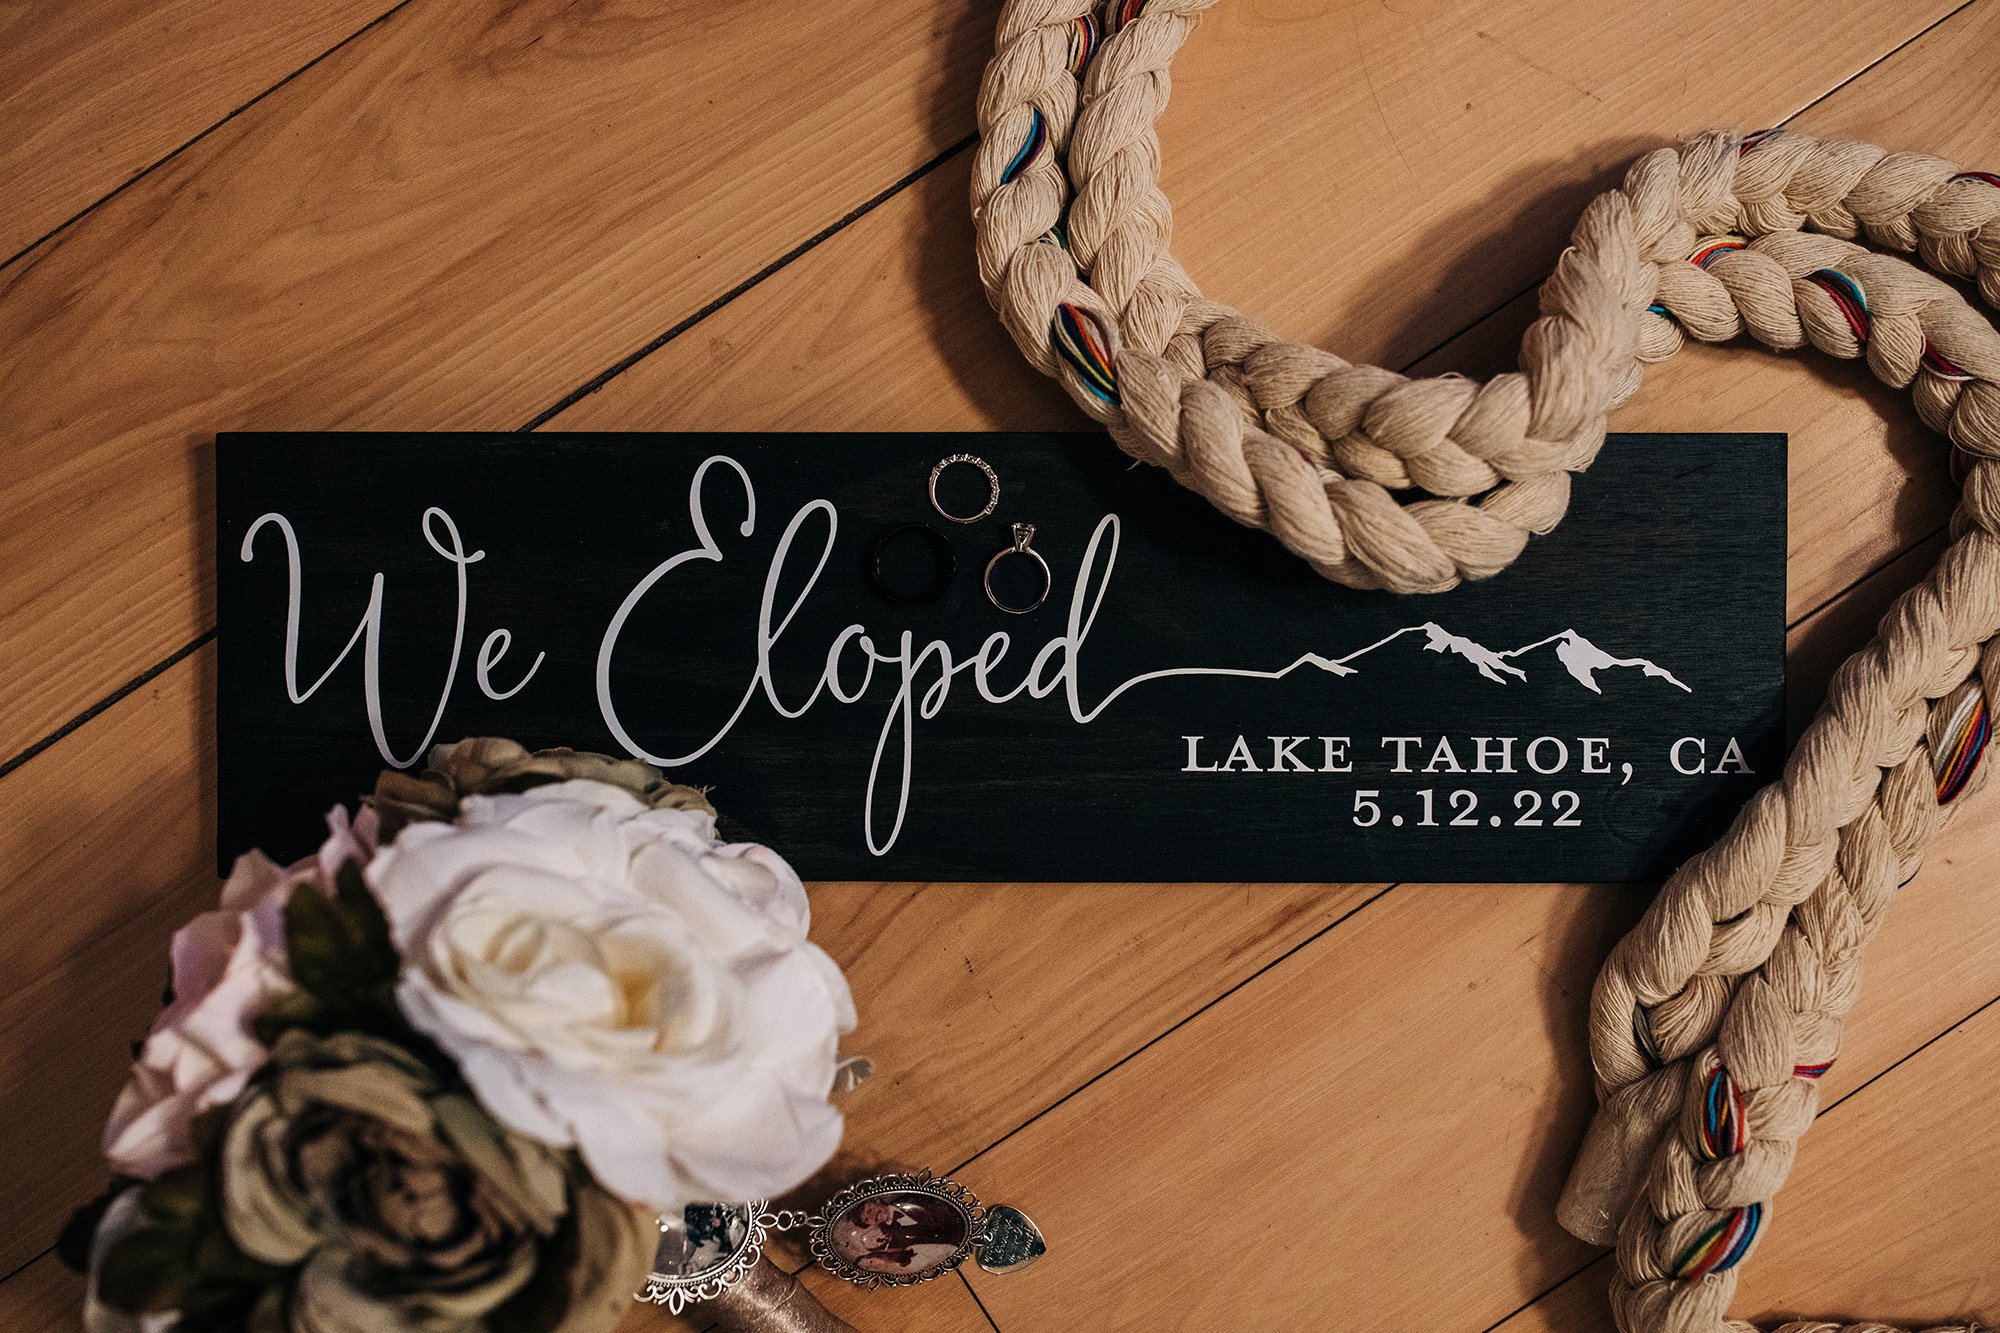 A handfasting cord, wedding rings, and a sign that reads "Eloped in Lake Tahoe, California".